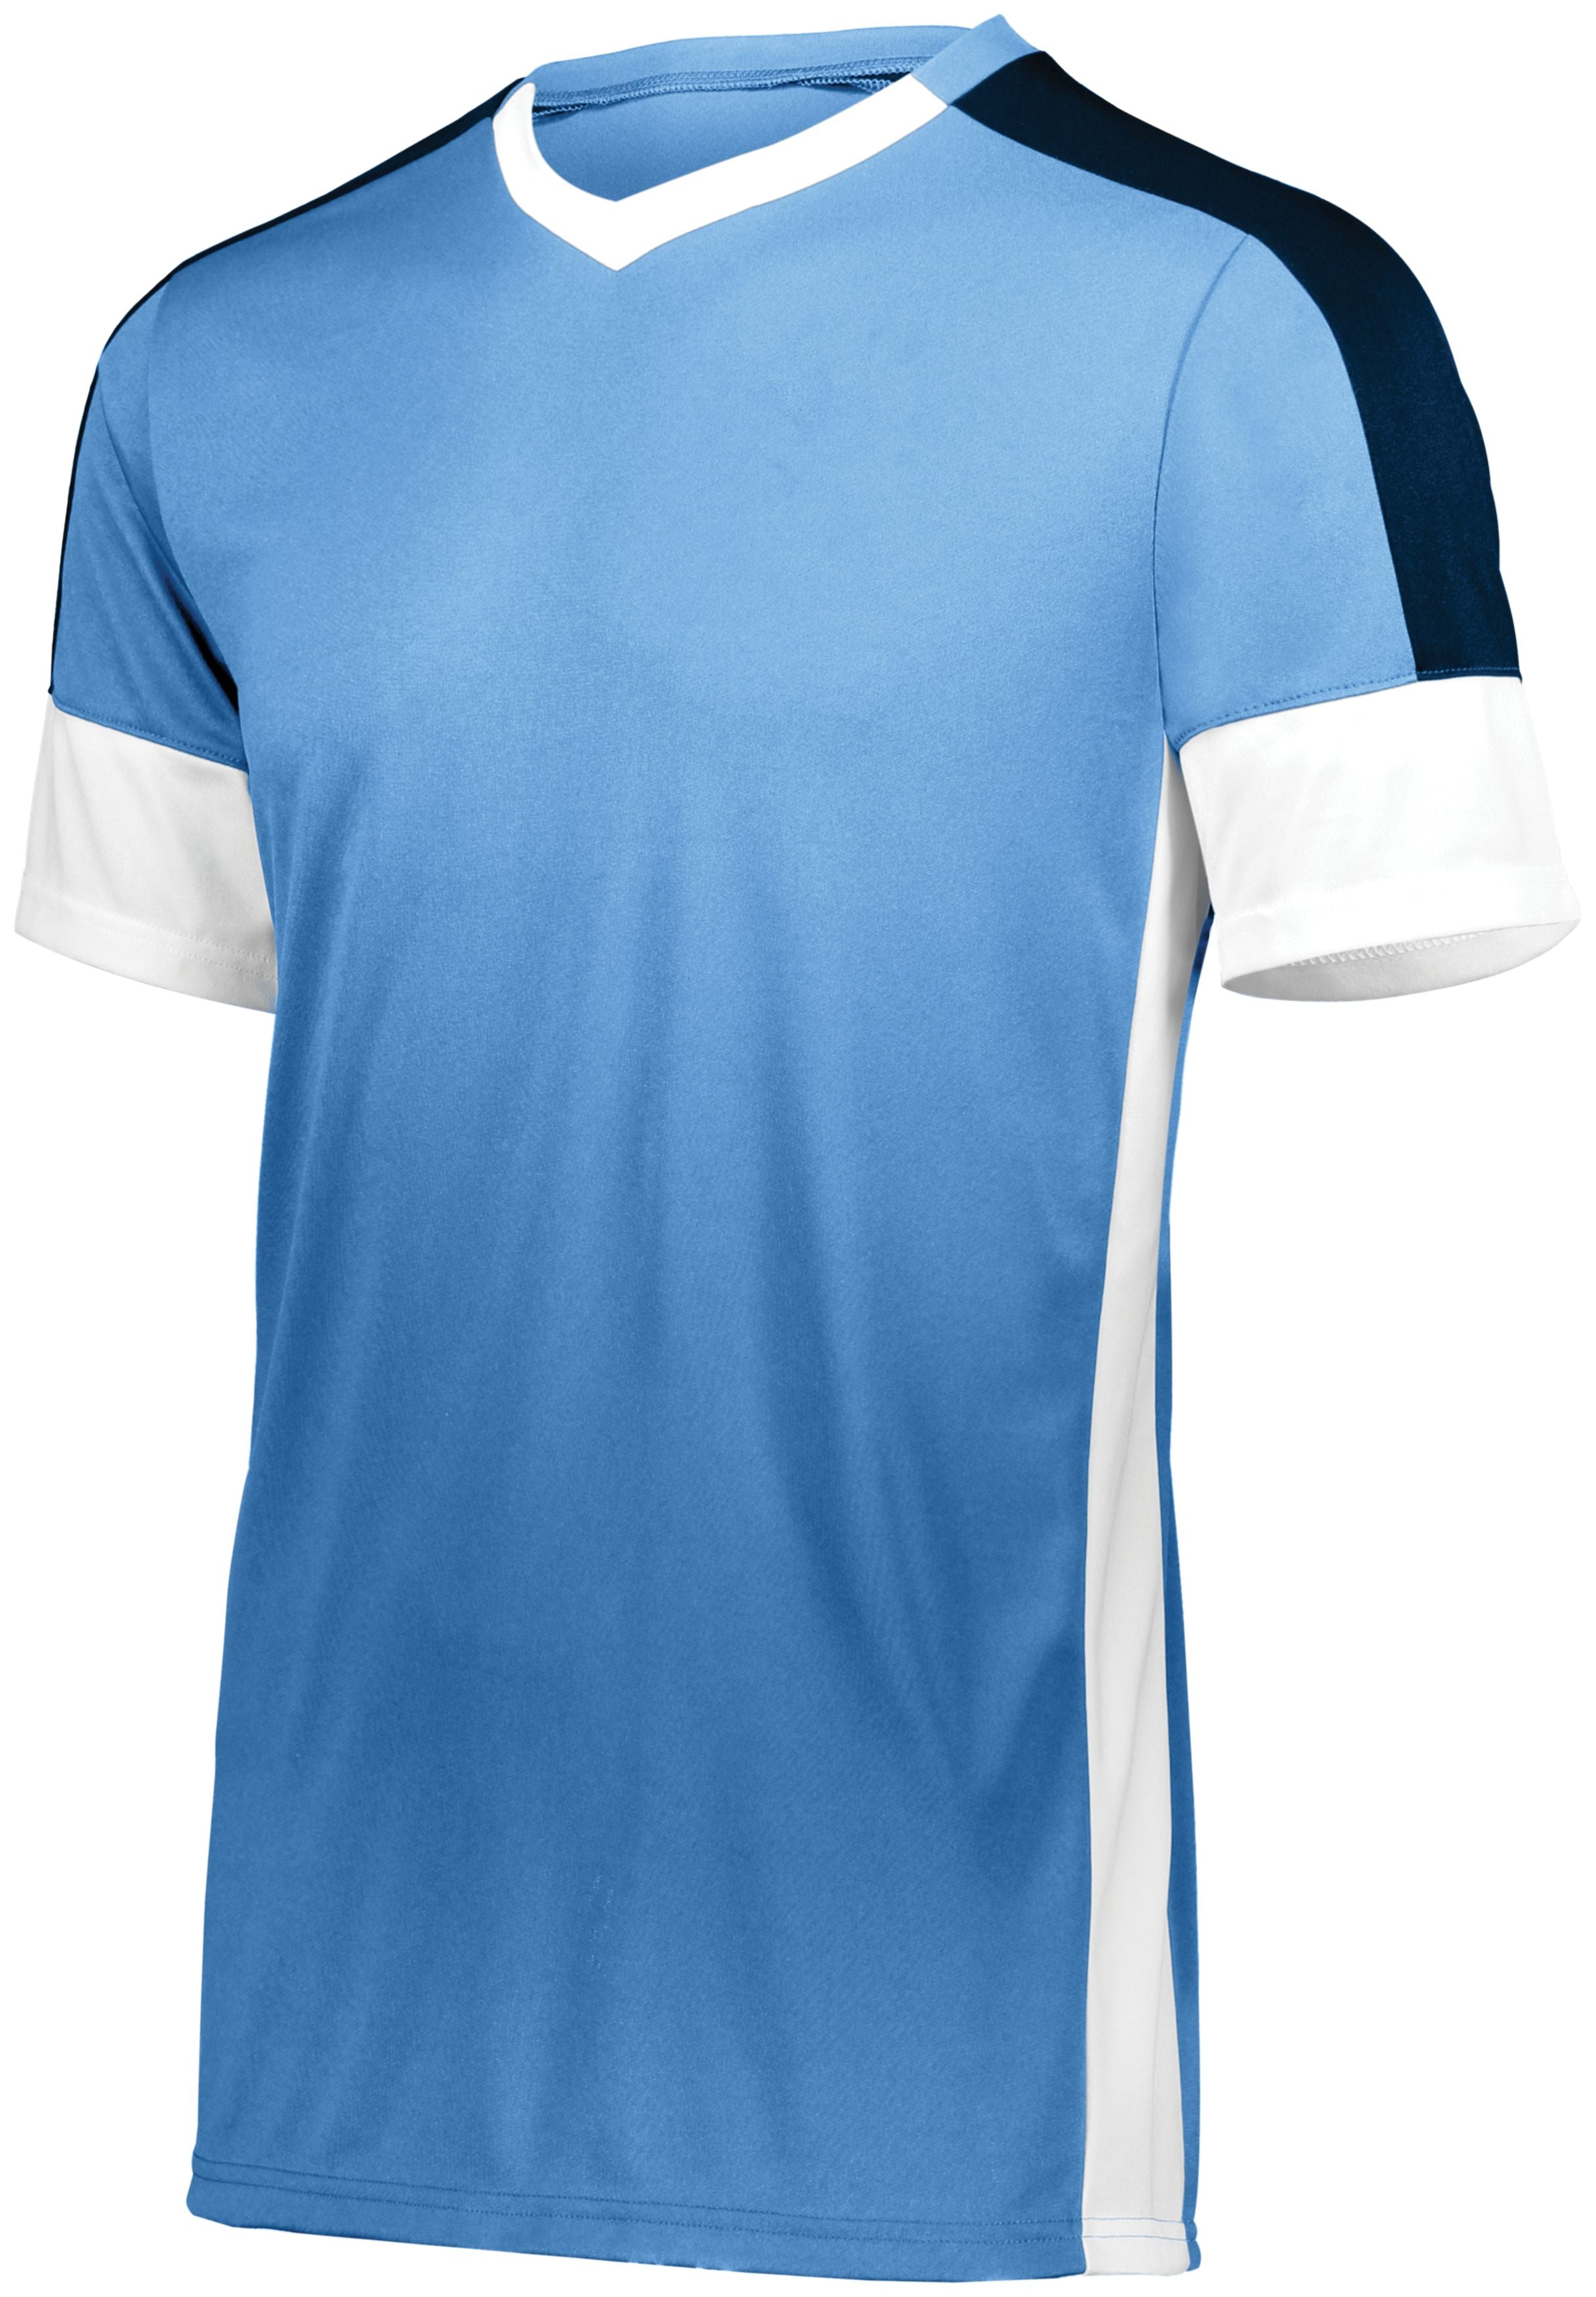 High 5 Youth Wembley Soccer Jersey